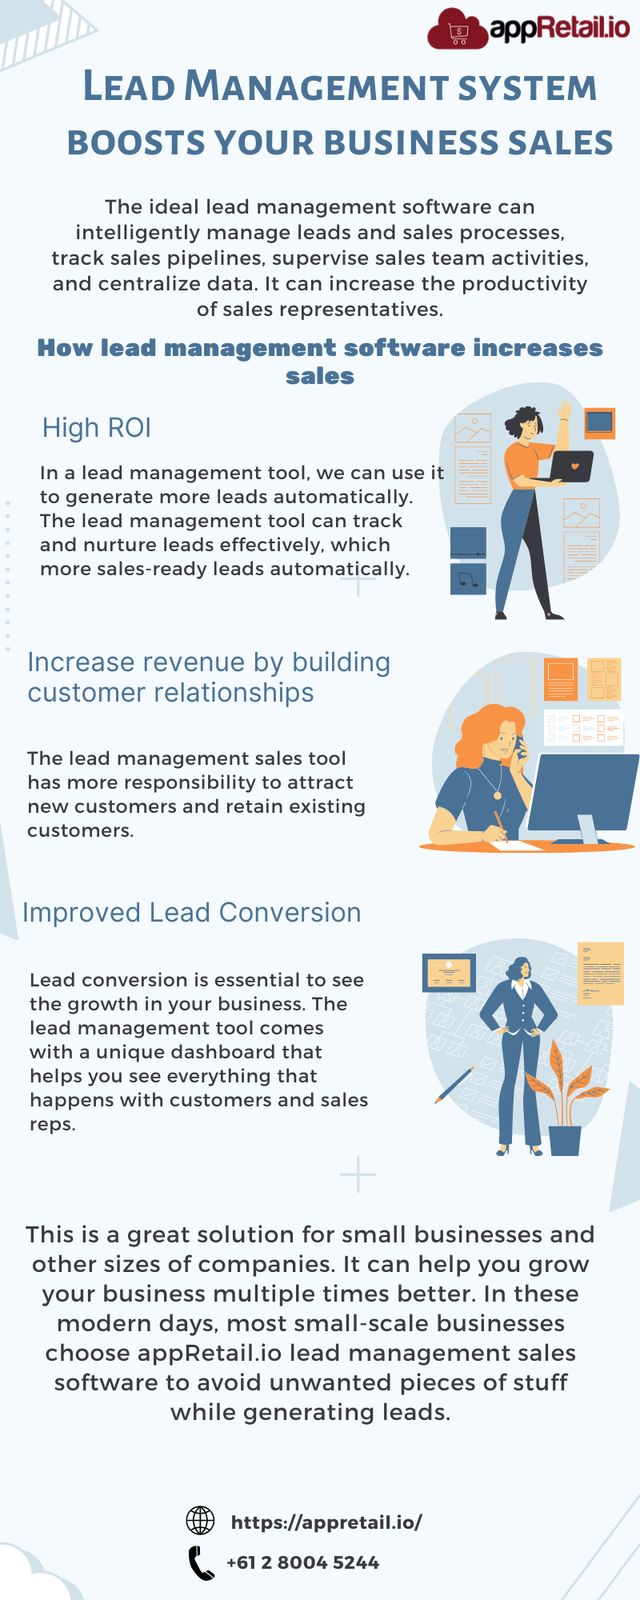 Lead Management system boosts your business sales